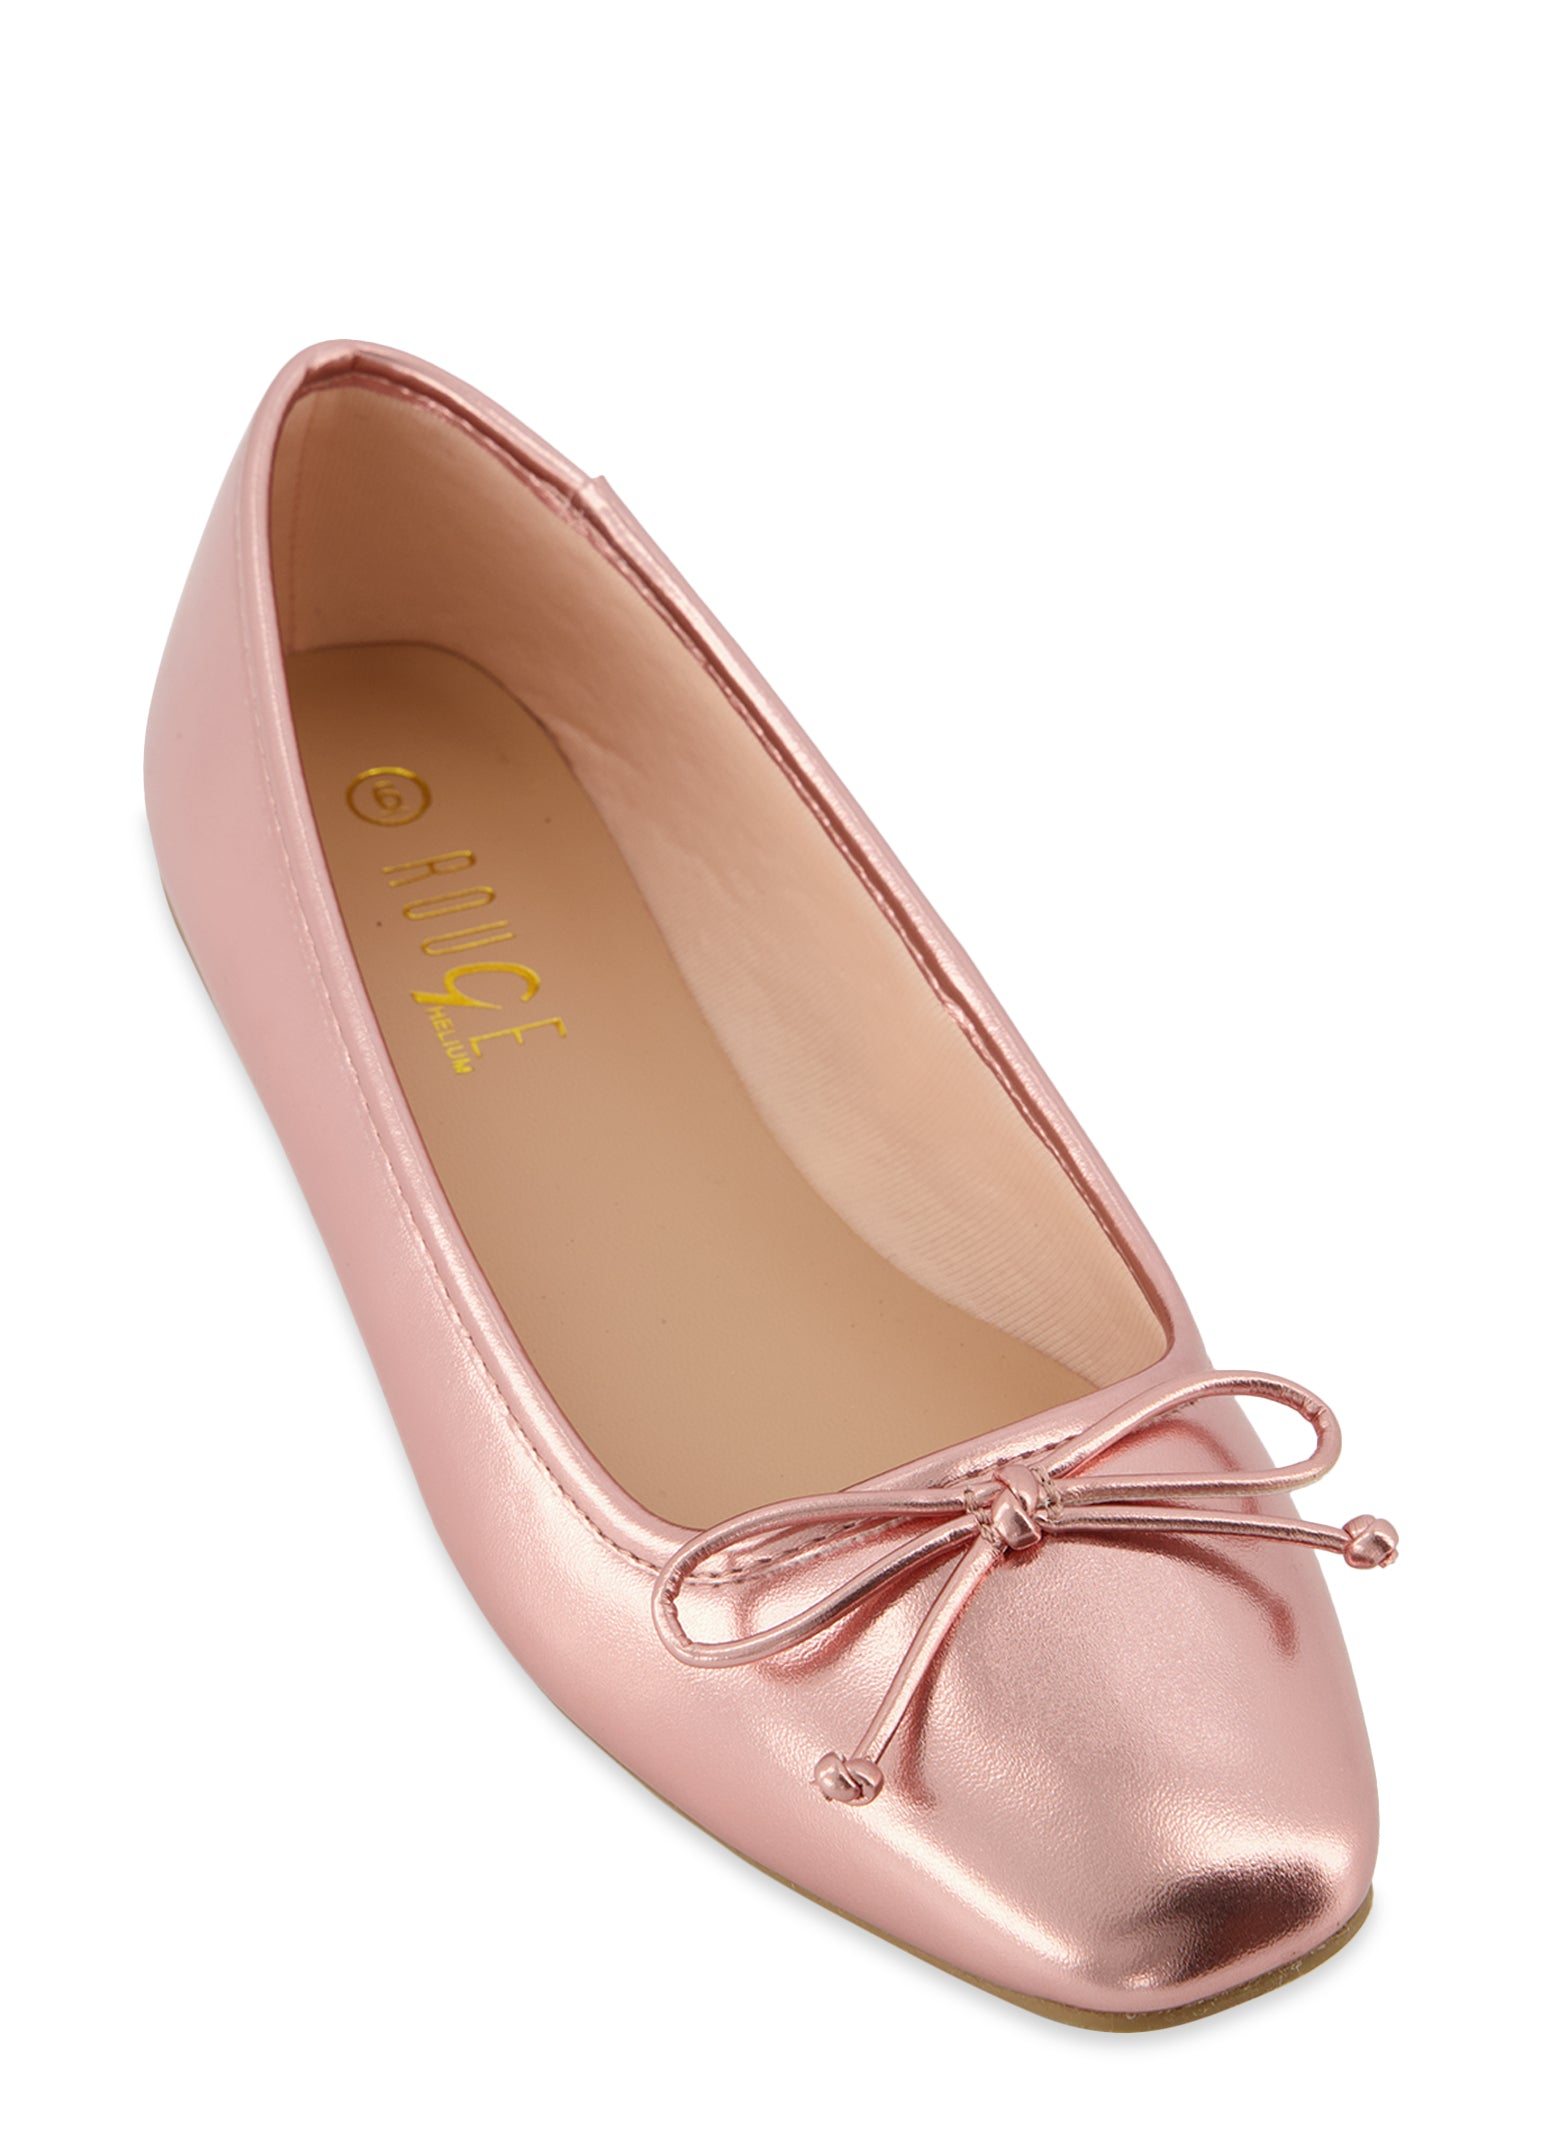 Square Toe Bow Tie Ballet Flats